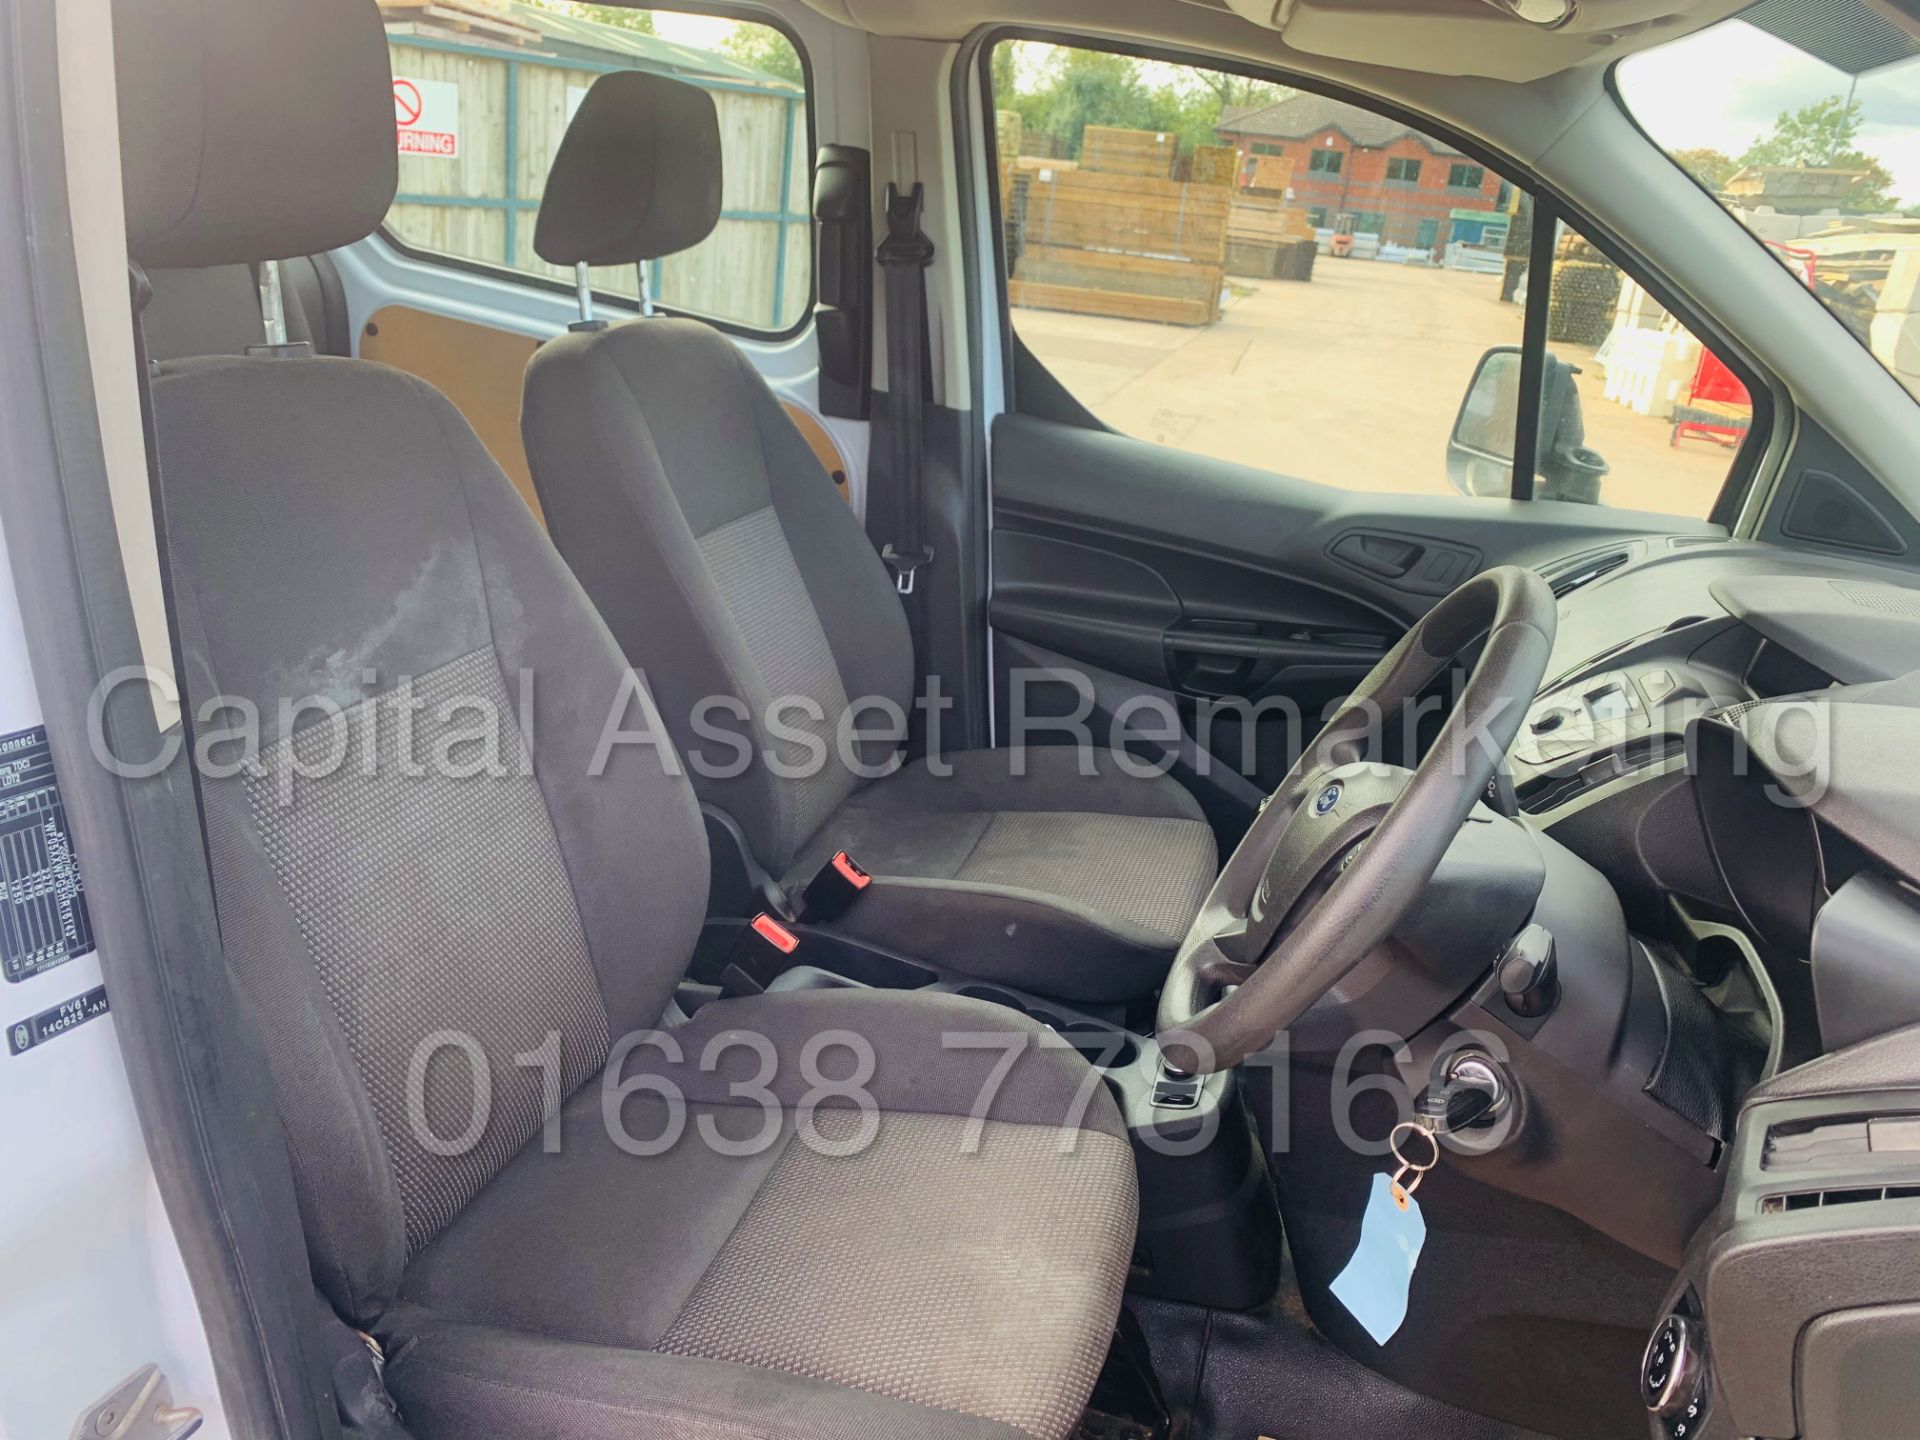 (On Sale) FORD TRANSIT CONNECT *LWB - 5 SEATER CREW VAN* (67 REG - EURO 6) 1.5 TDCI *A/C* (1 OWNER) - Image 28 of 40